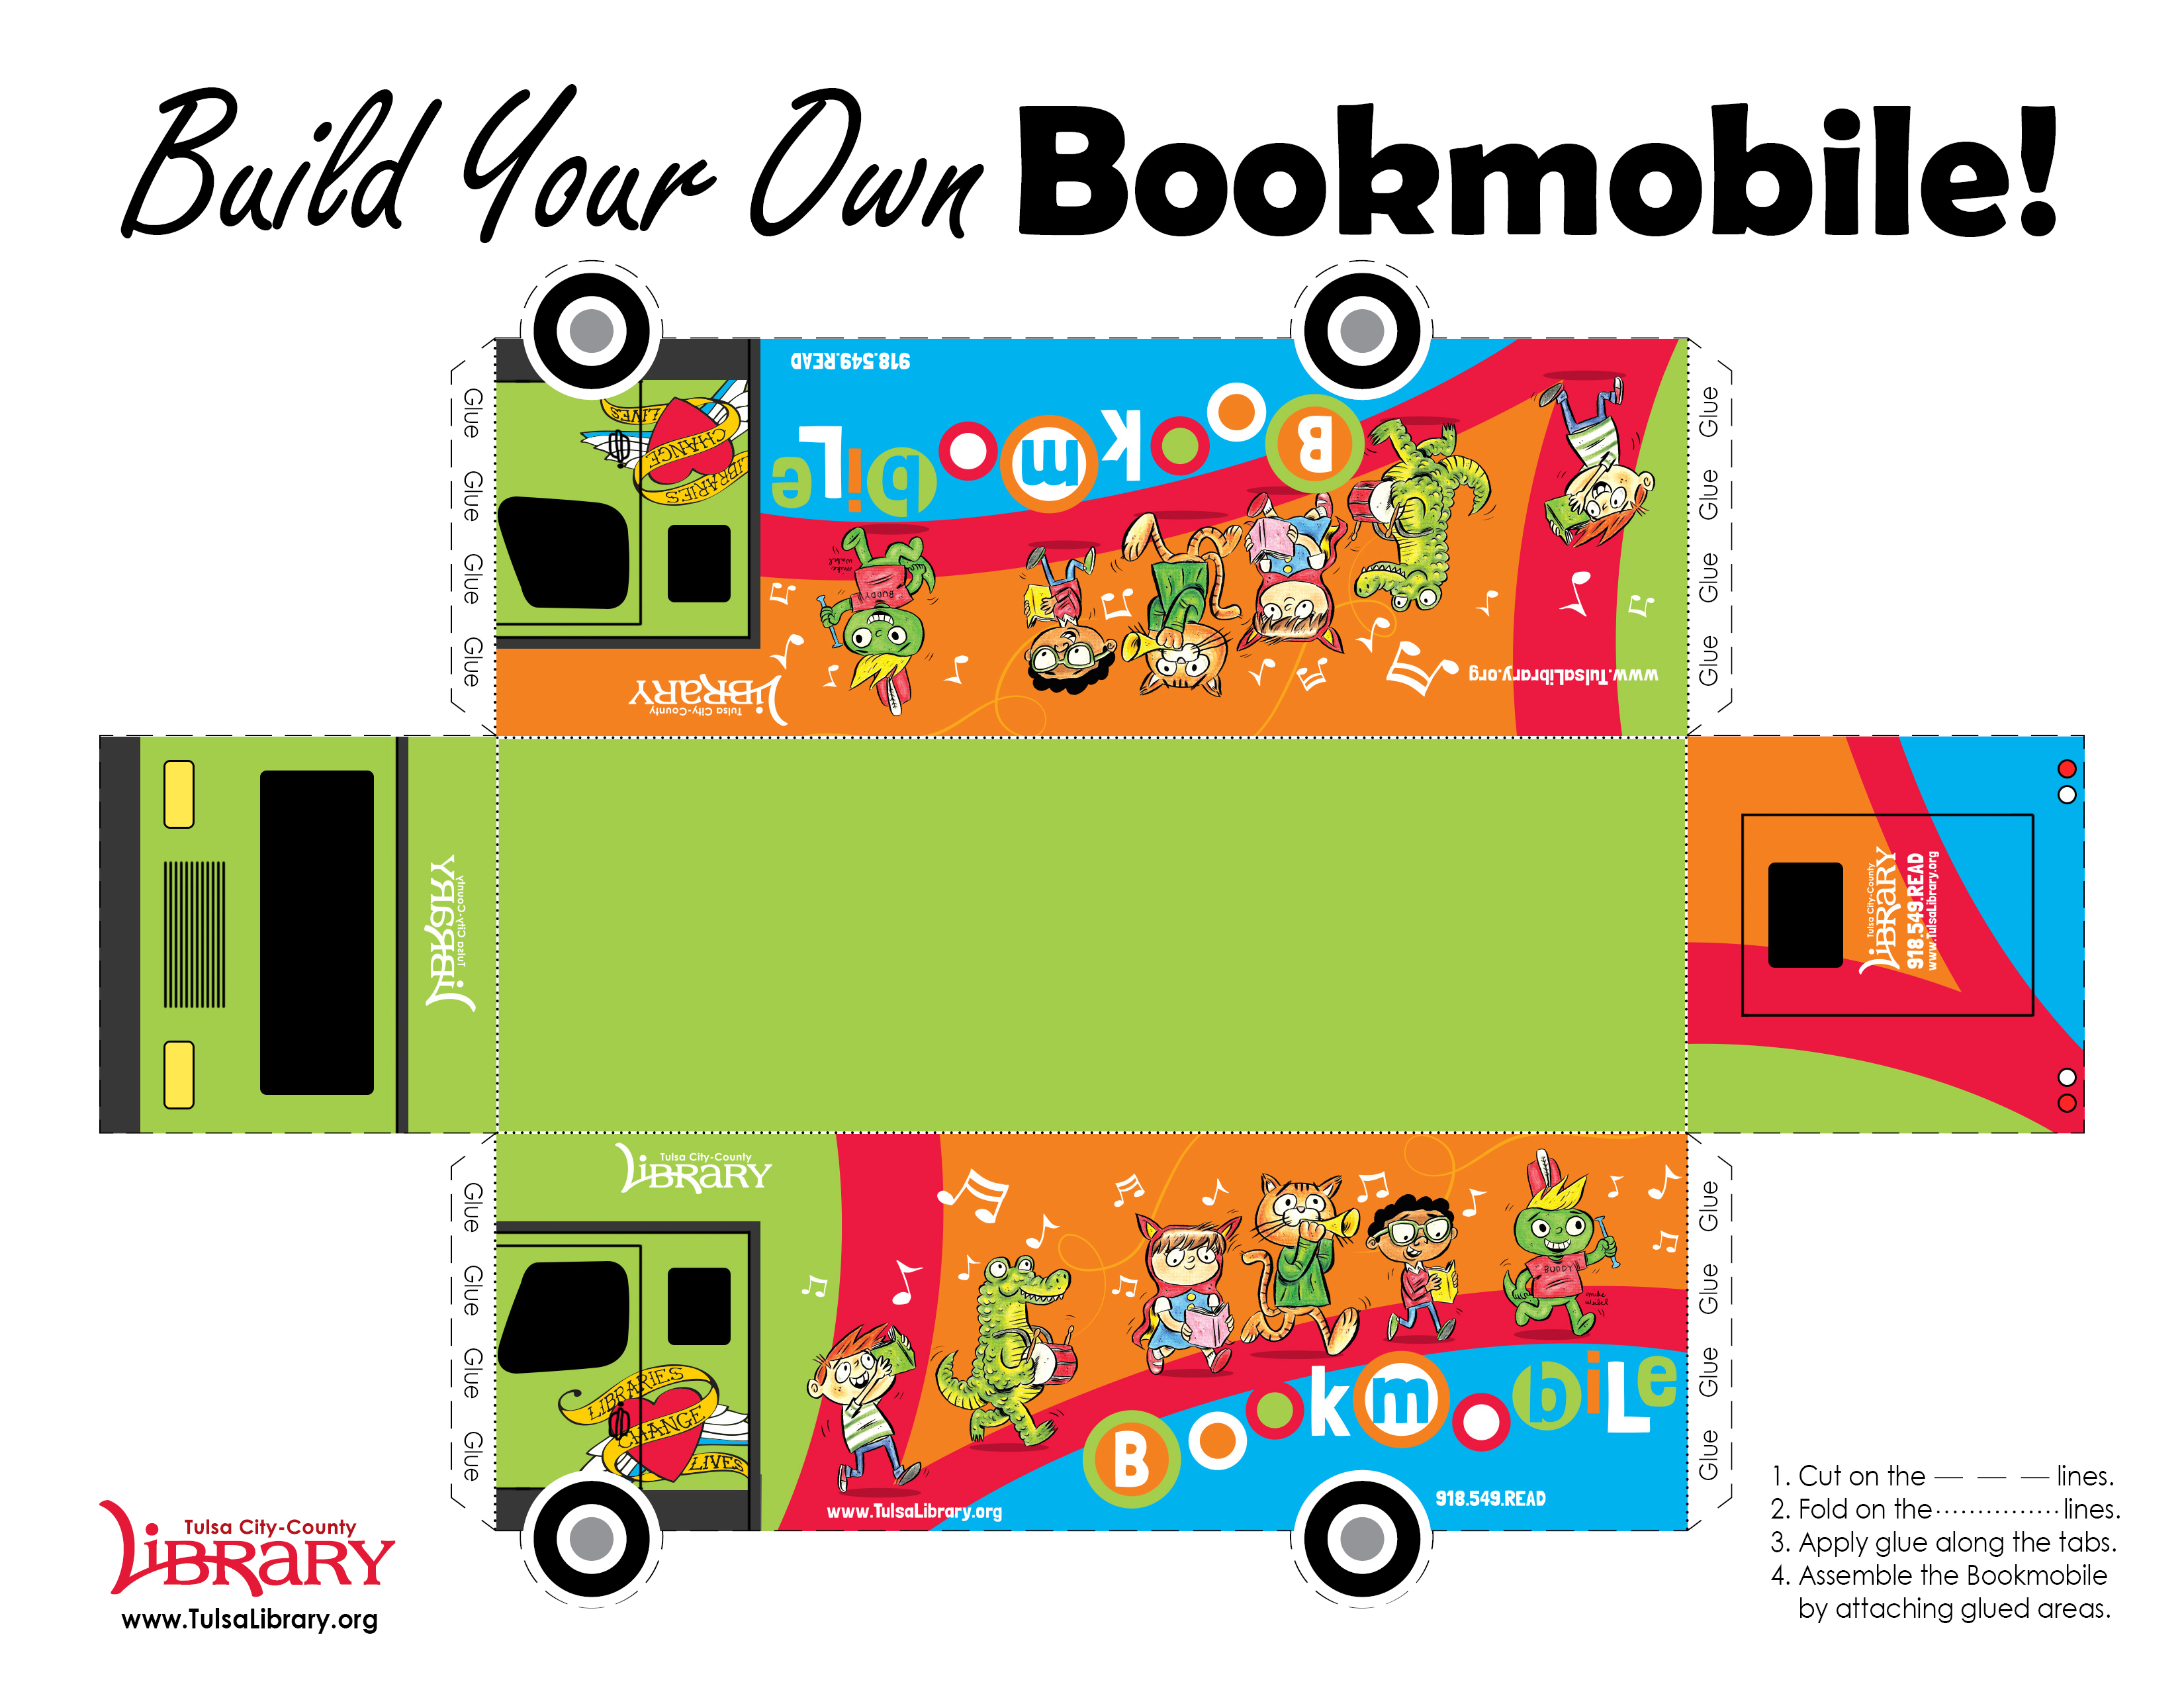 Build Your Own Bookmobile